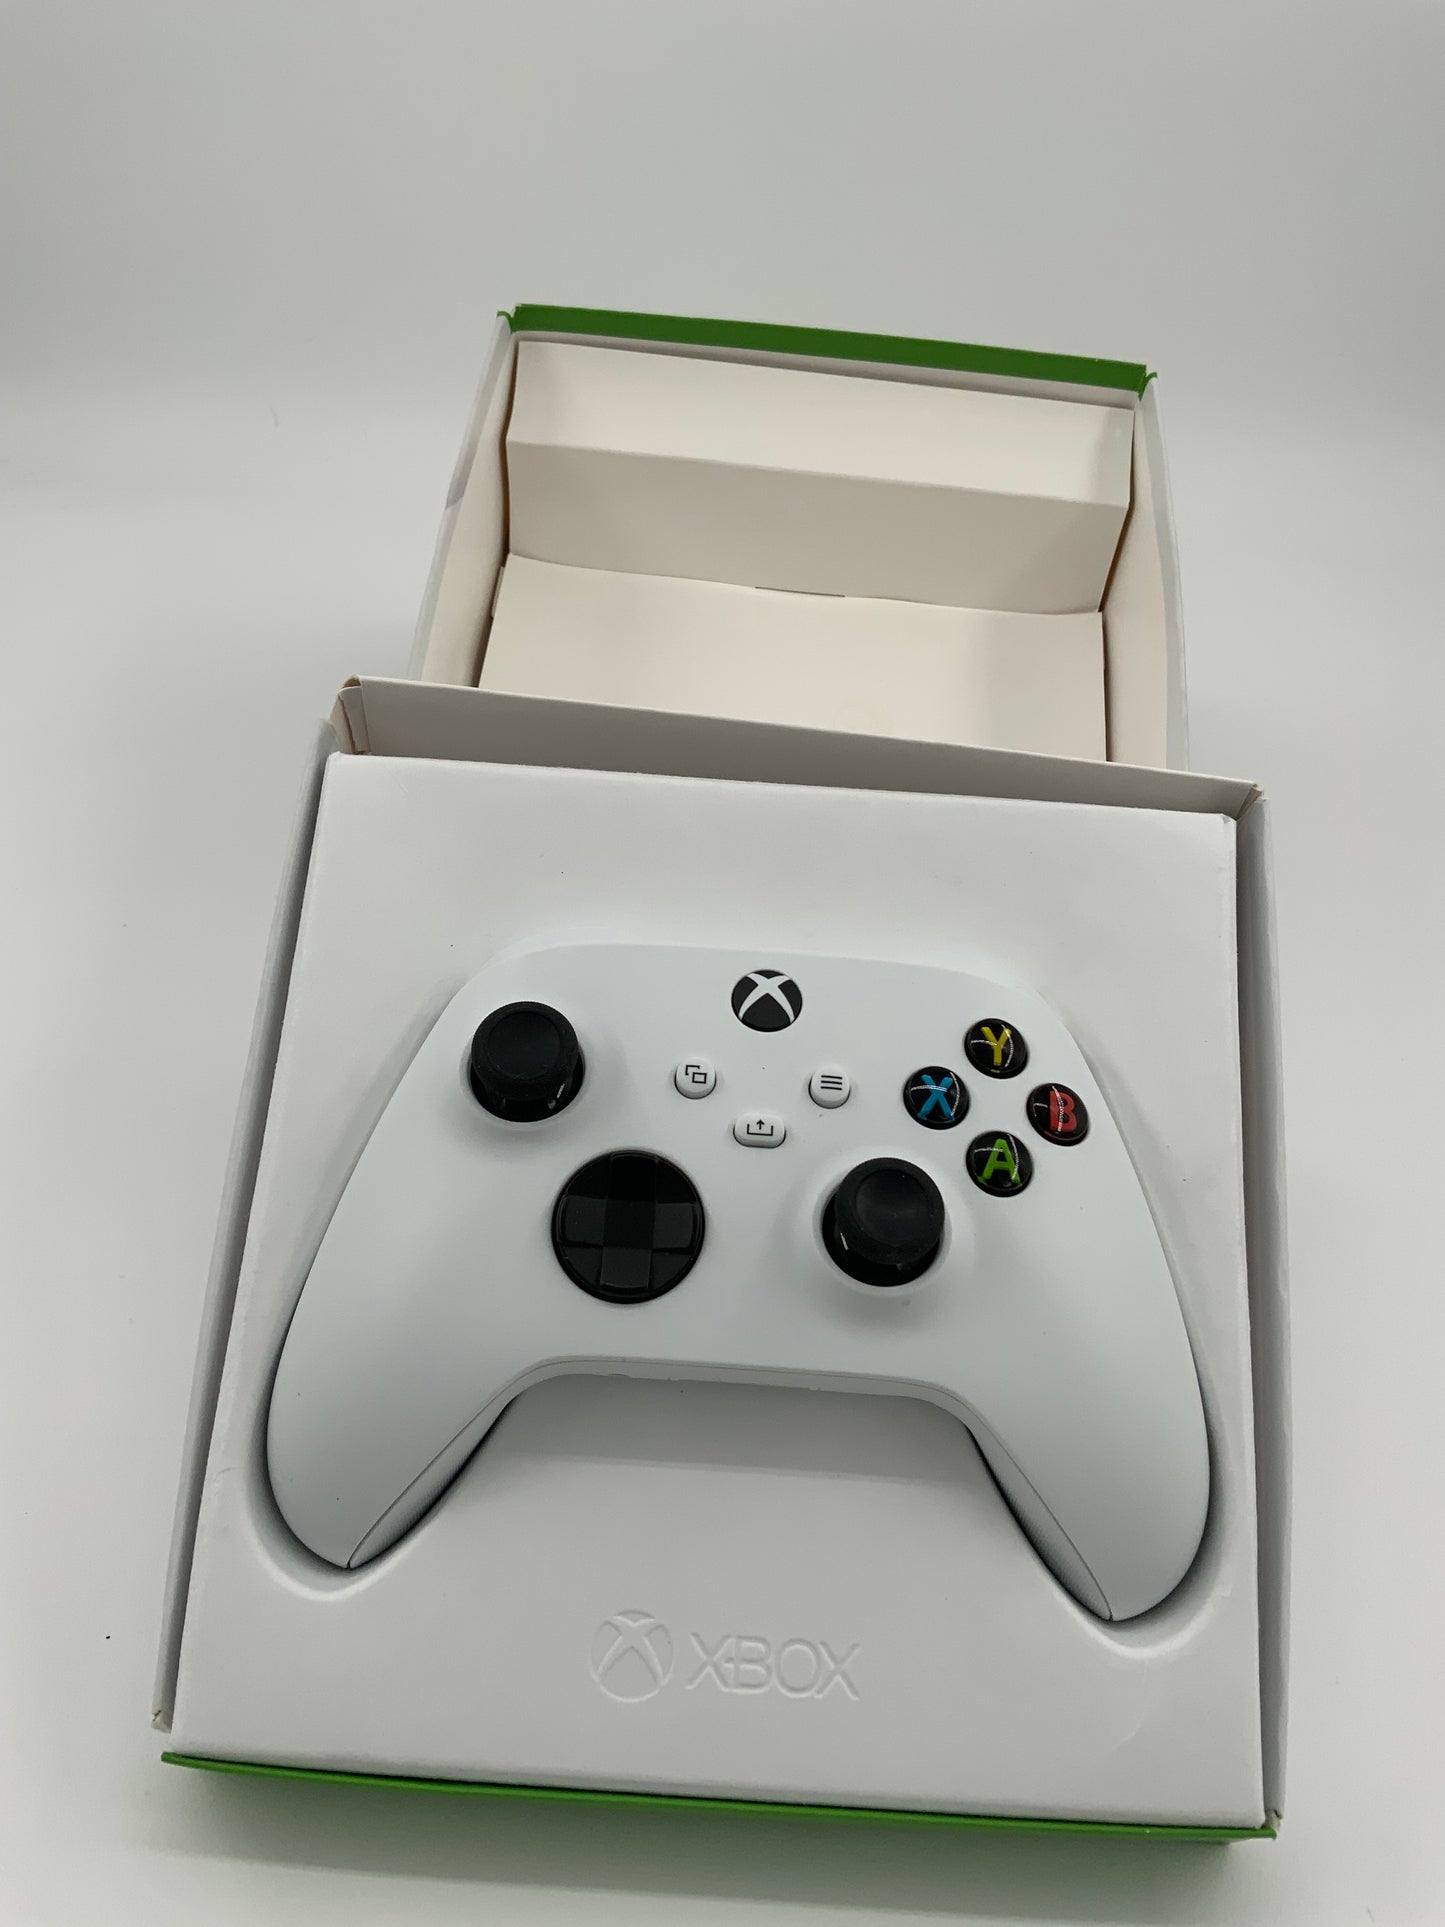 Xbox Core Wireless Gaming Controller